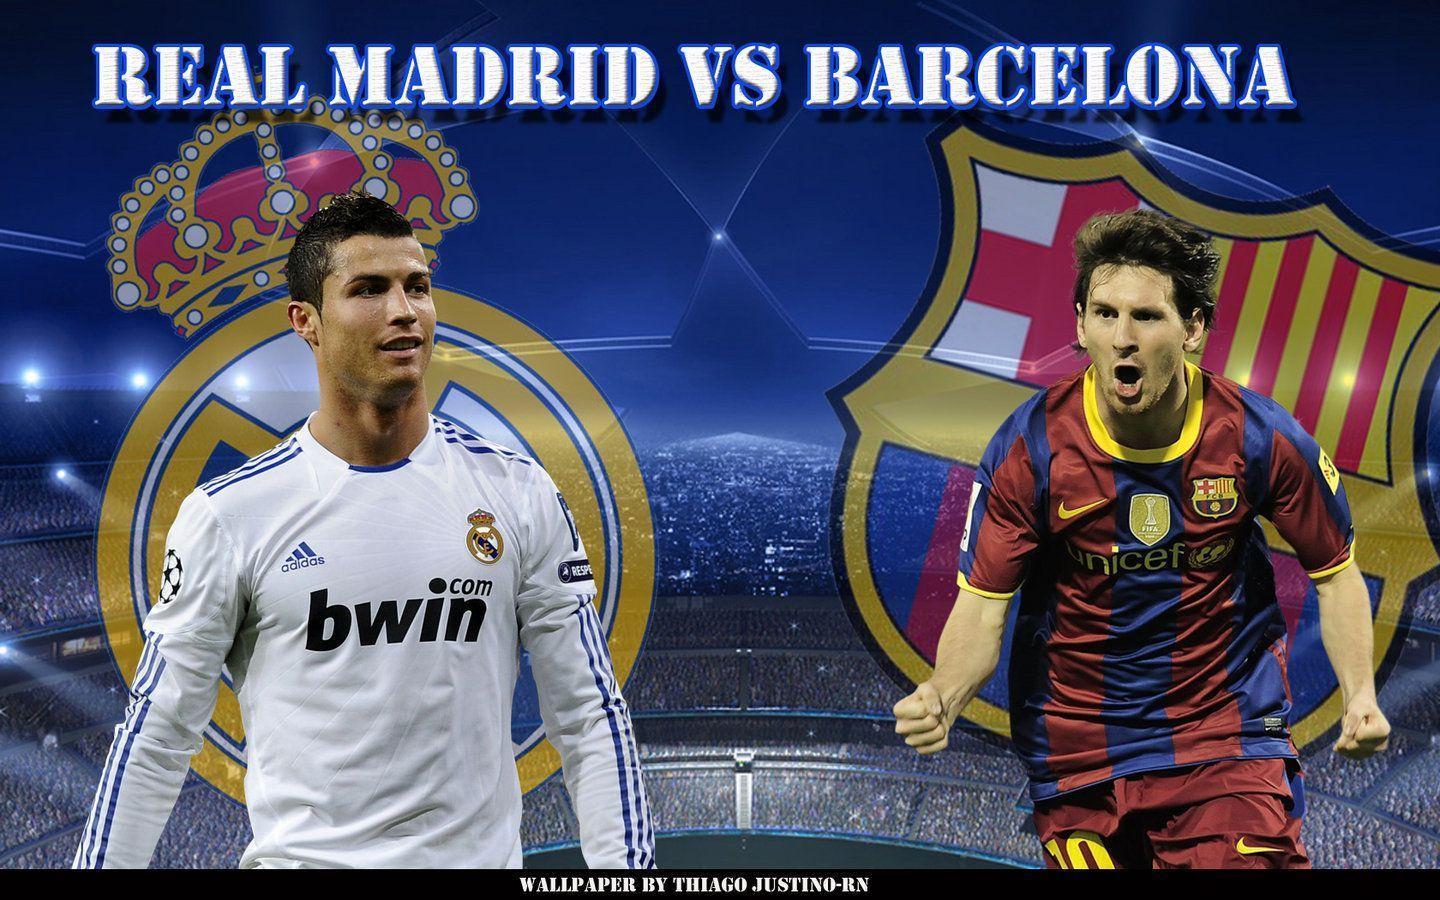 Real Madrid VS Barcelona picture